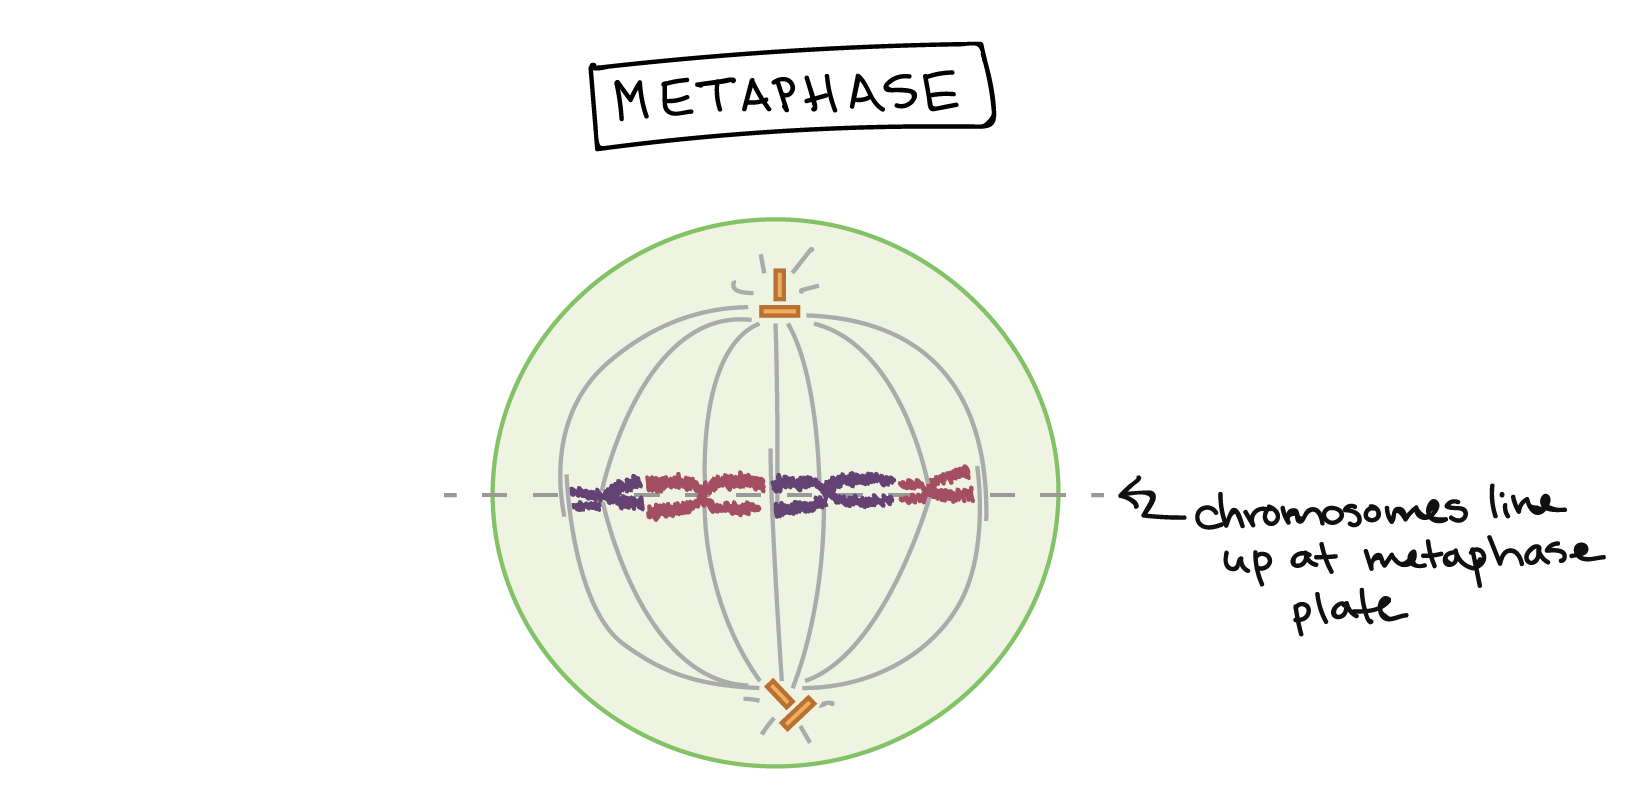 https://www.khanacademy.org/science/biology/cellular-molecular-biology/mitosis/a/phases-of-mitosis